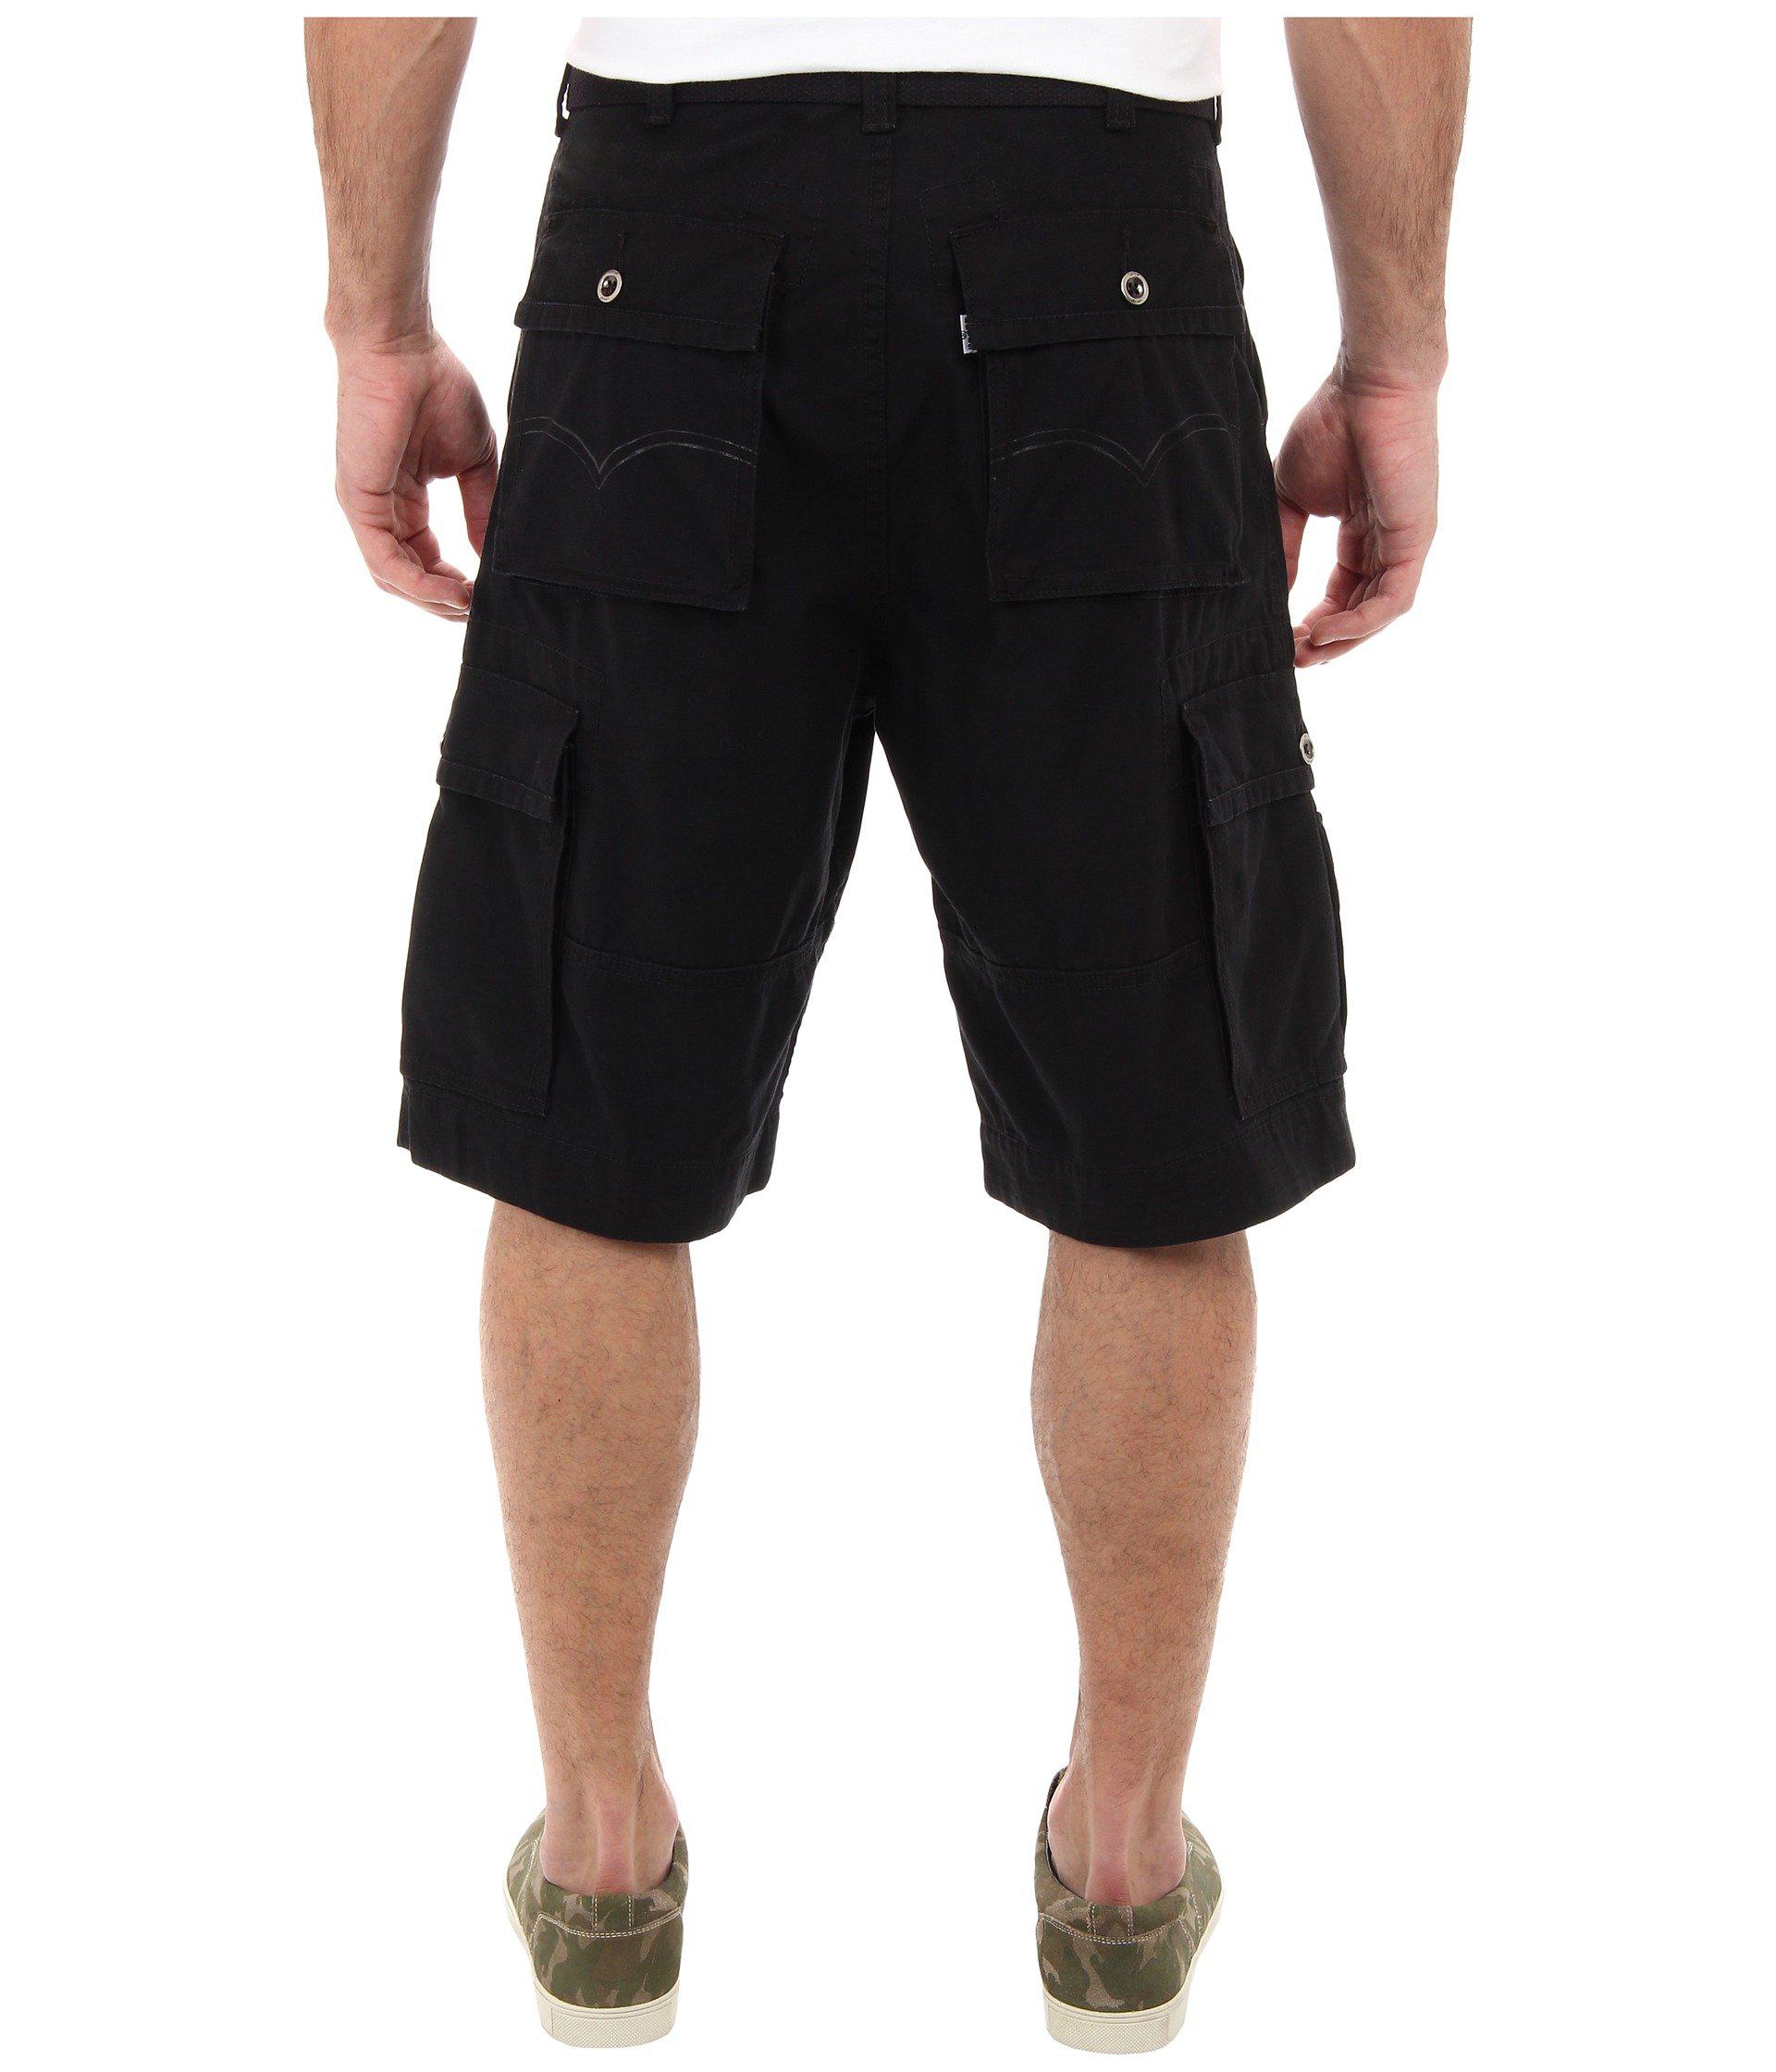 NWT Men's Levi's Snap Belted Cargo Shorts Carrier Ace Squad All Sizes Black 